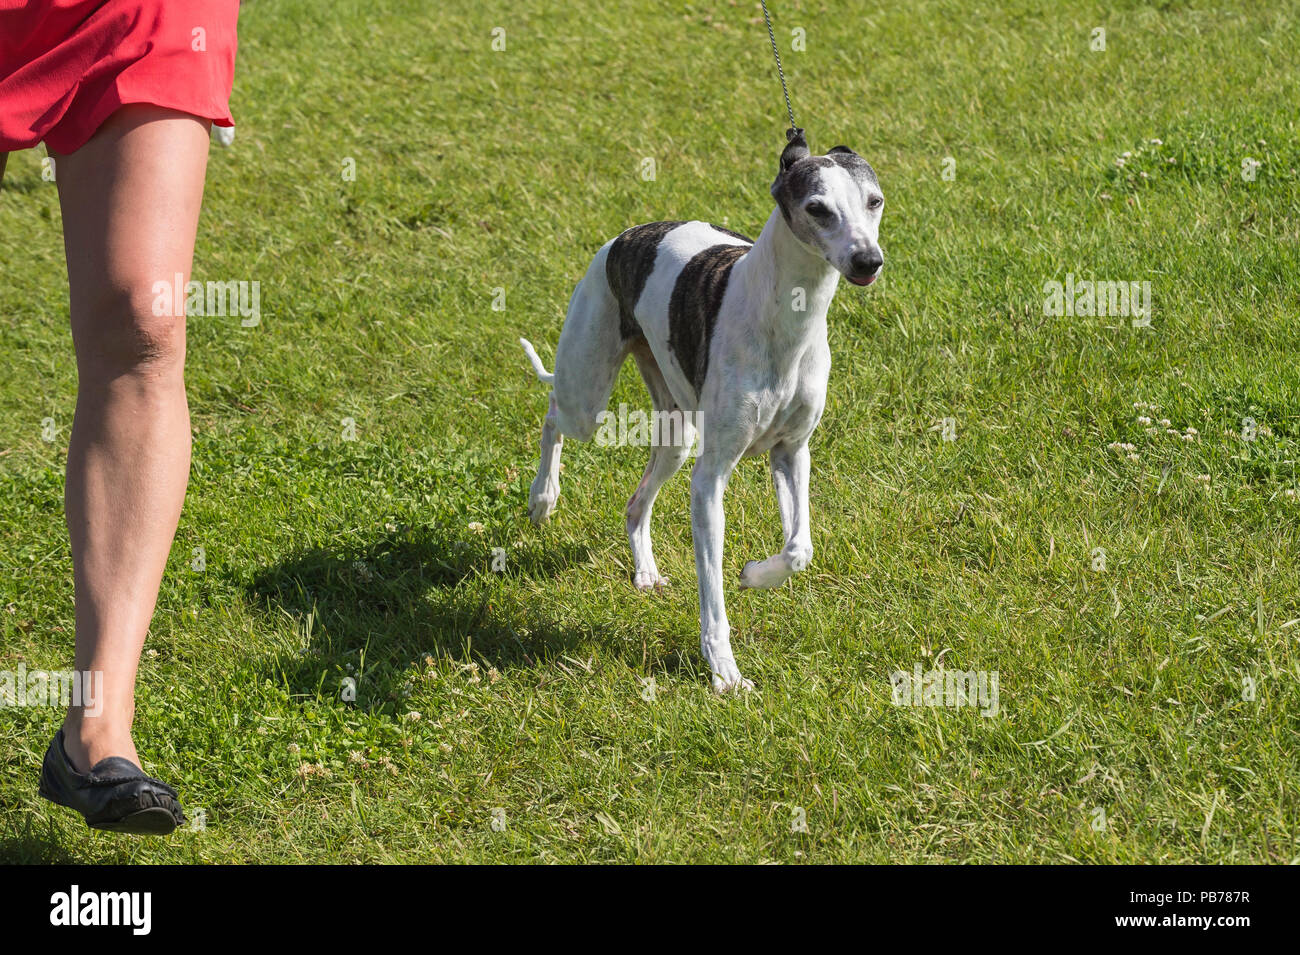 Whippet Dog Evelyn Kenny Kennel And Obedience Club Dog Show Alberta Canada Stock Photo Alamy